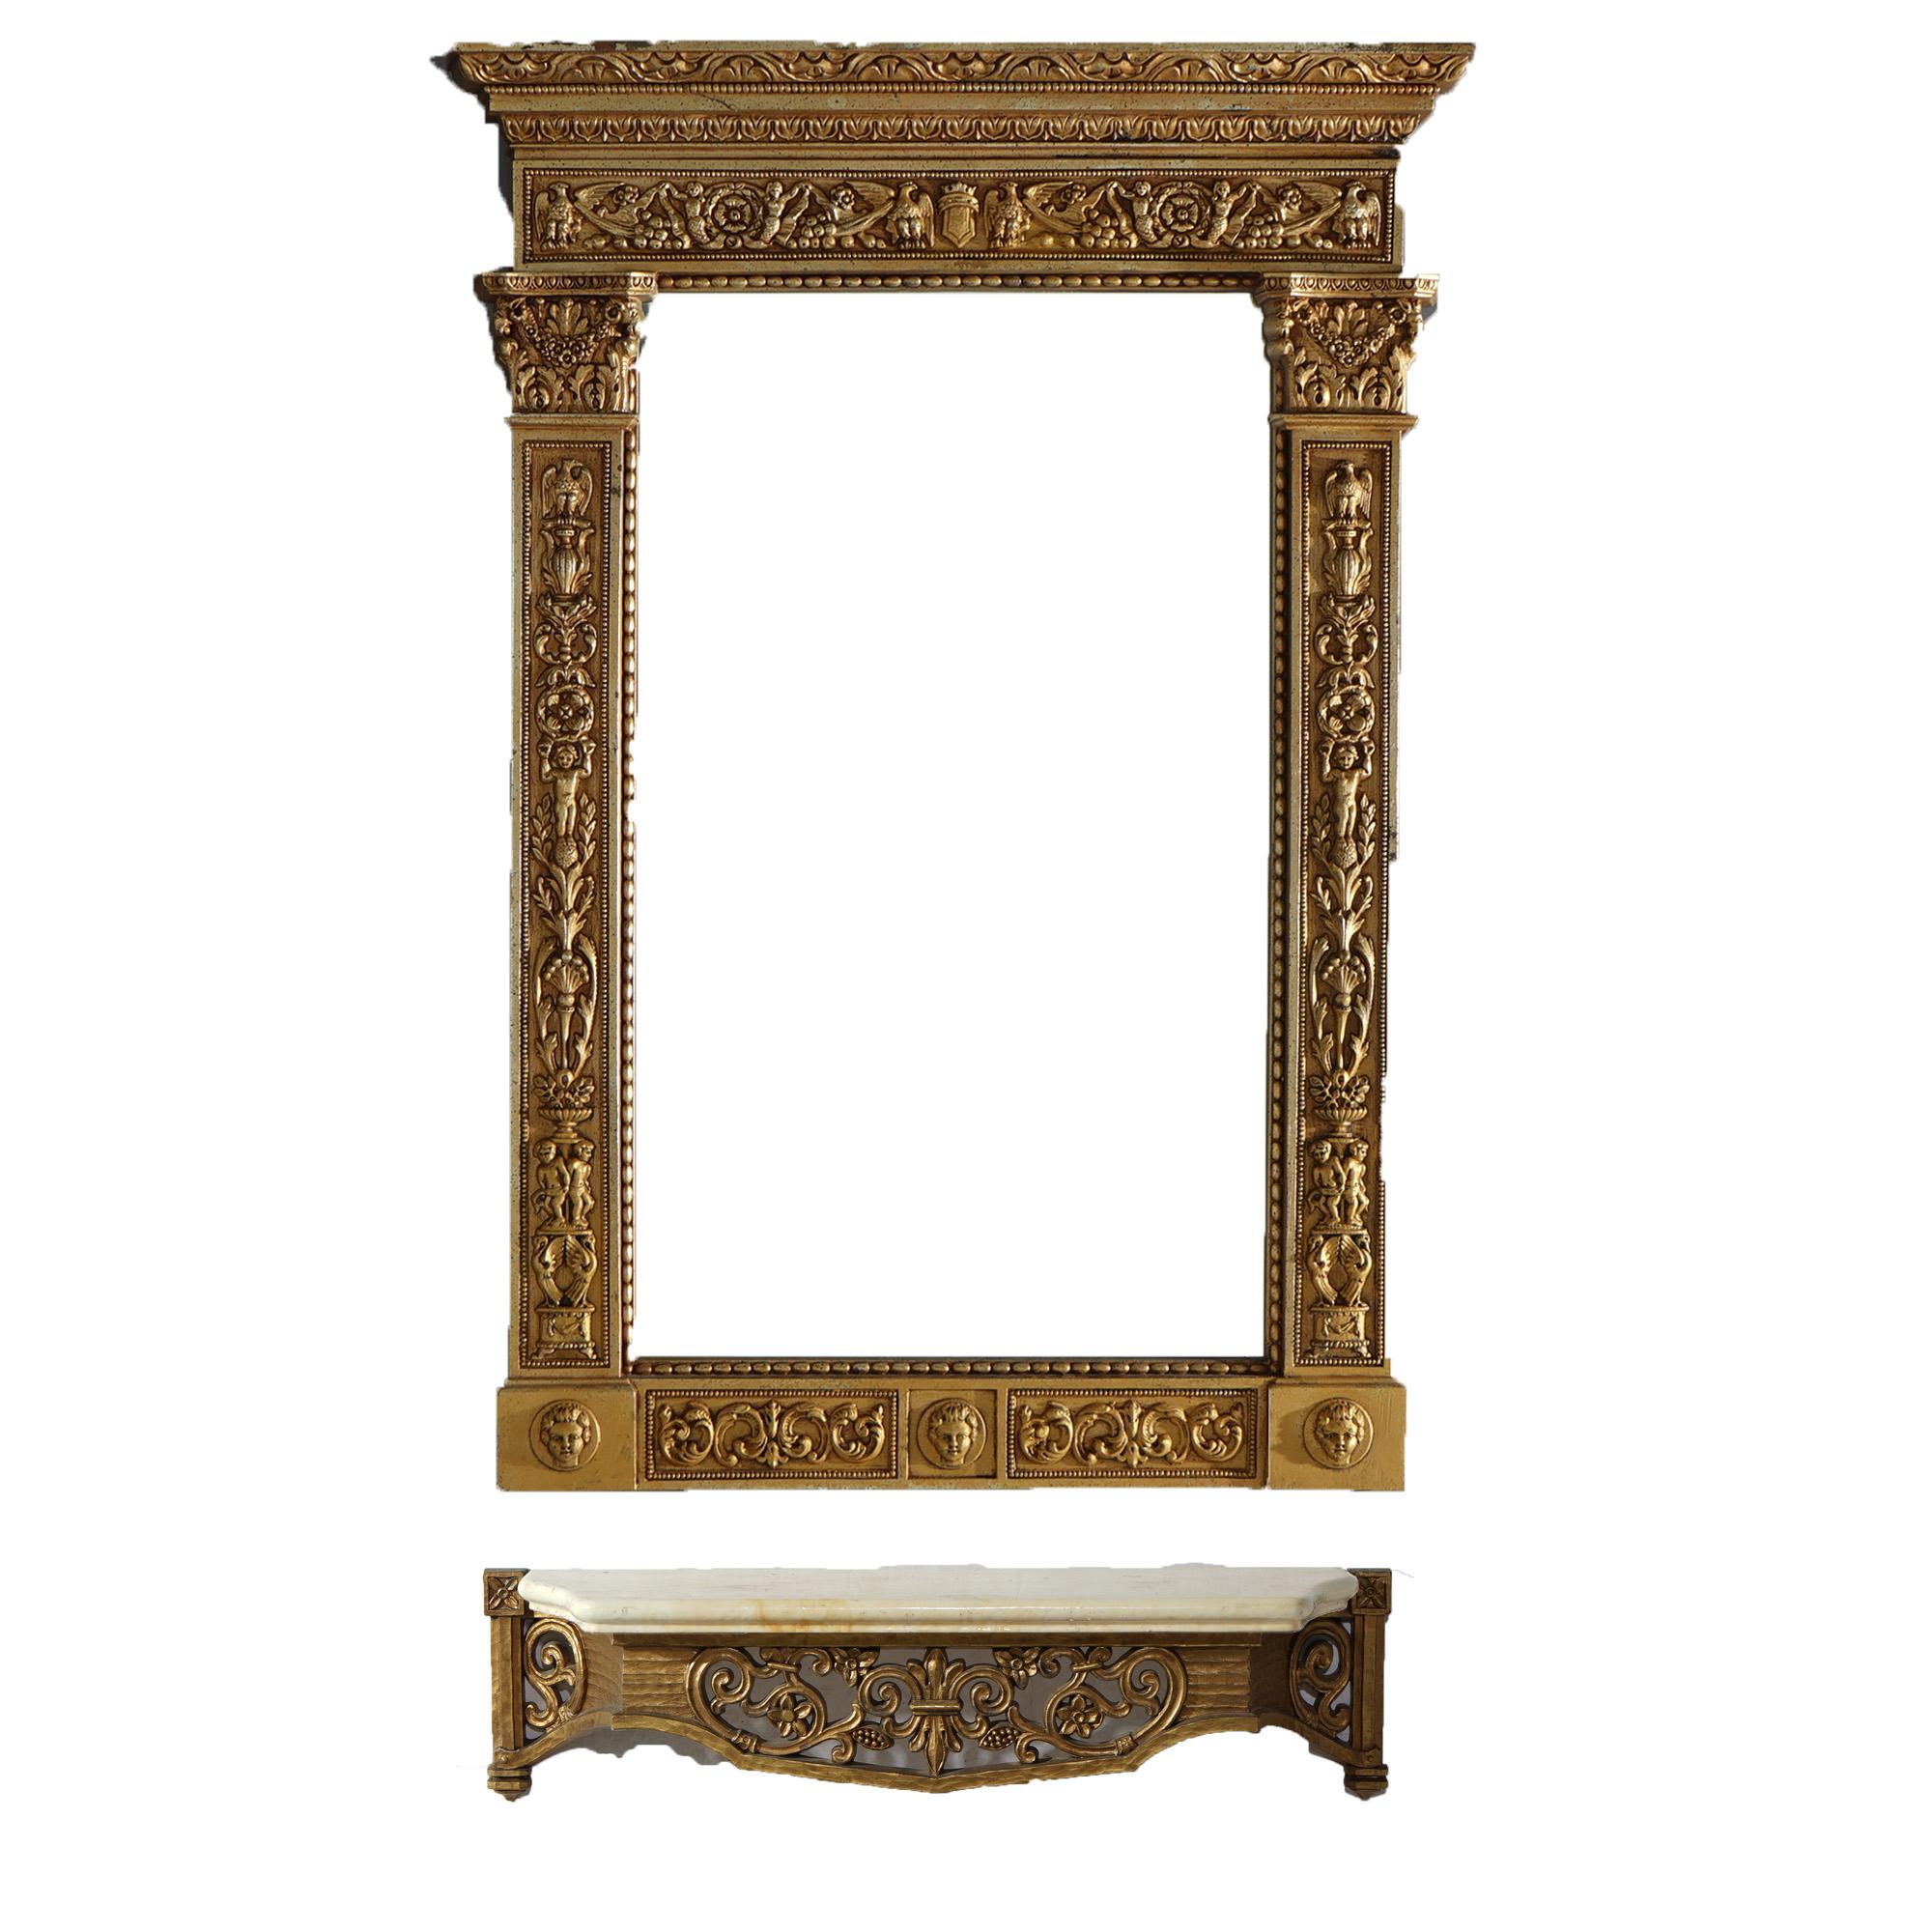 A French Empire mirror and shelf offers gold gilt frame with eagles, mermaids (caryatids), masks, flowers and scroll elements over marble top gilt shelf, c1950

Measures - mirror 34.5